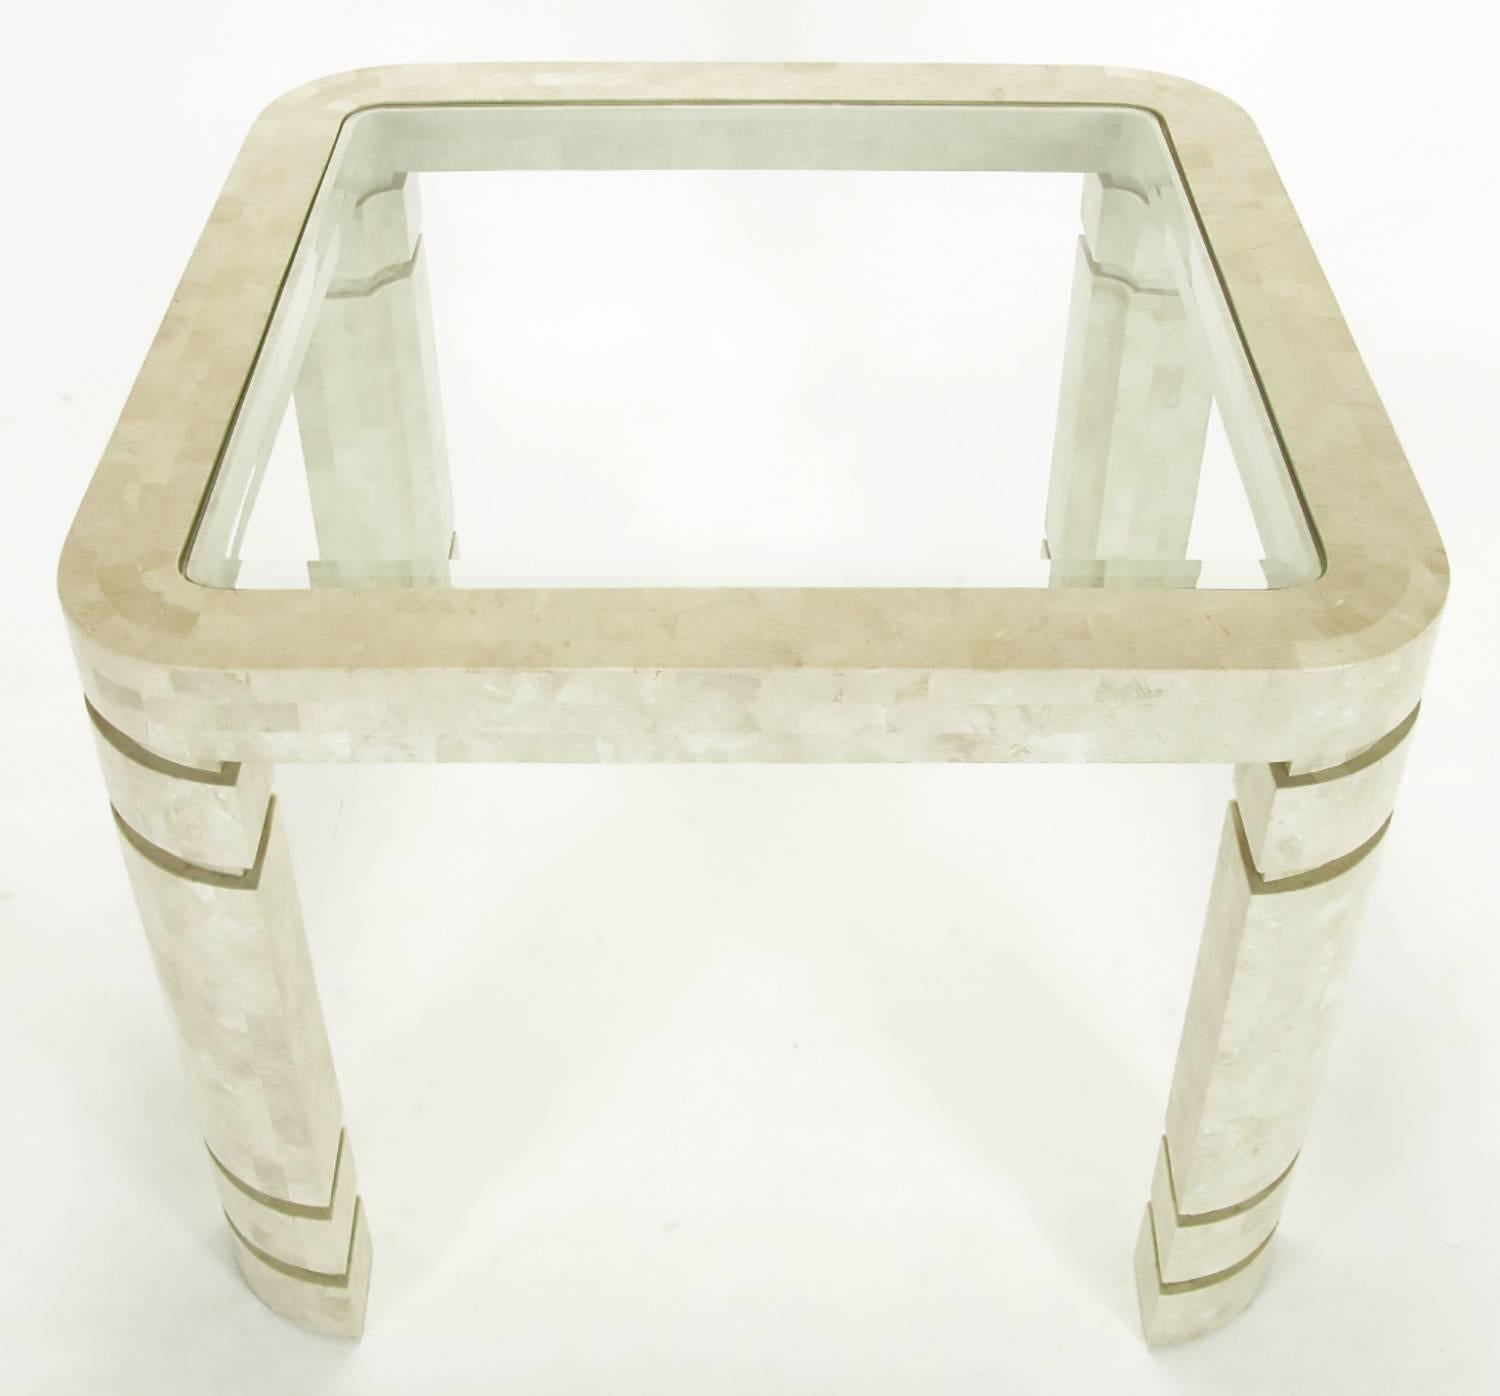 Tessellated fossil stone game table after designs by Karl Springer. Radius corner legs with unexpected double incisions, thick table surround or apron and beveled edge glass top. Likely from the same Philippines manufacturer used by Karl Springer